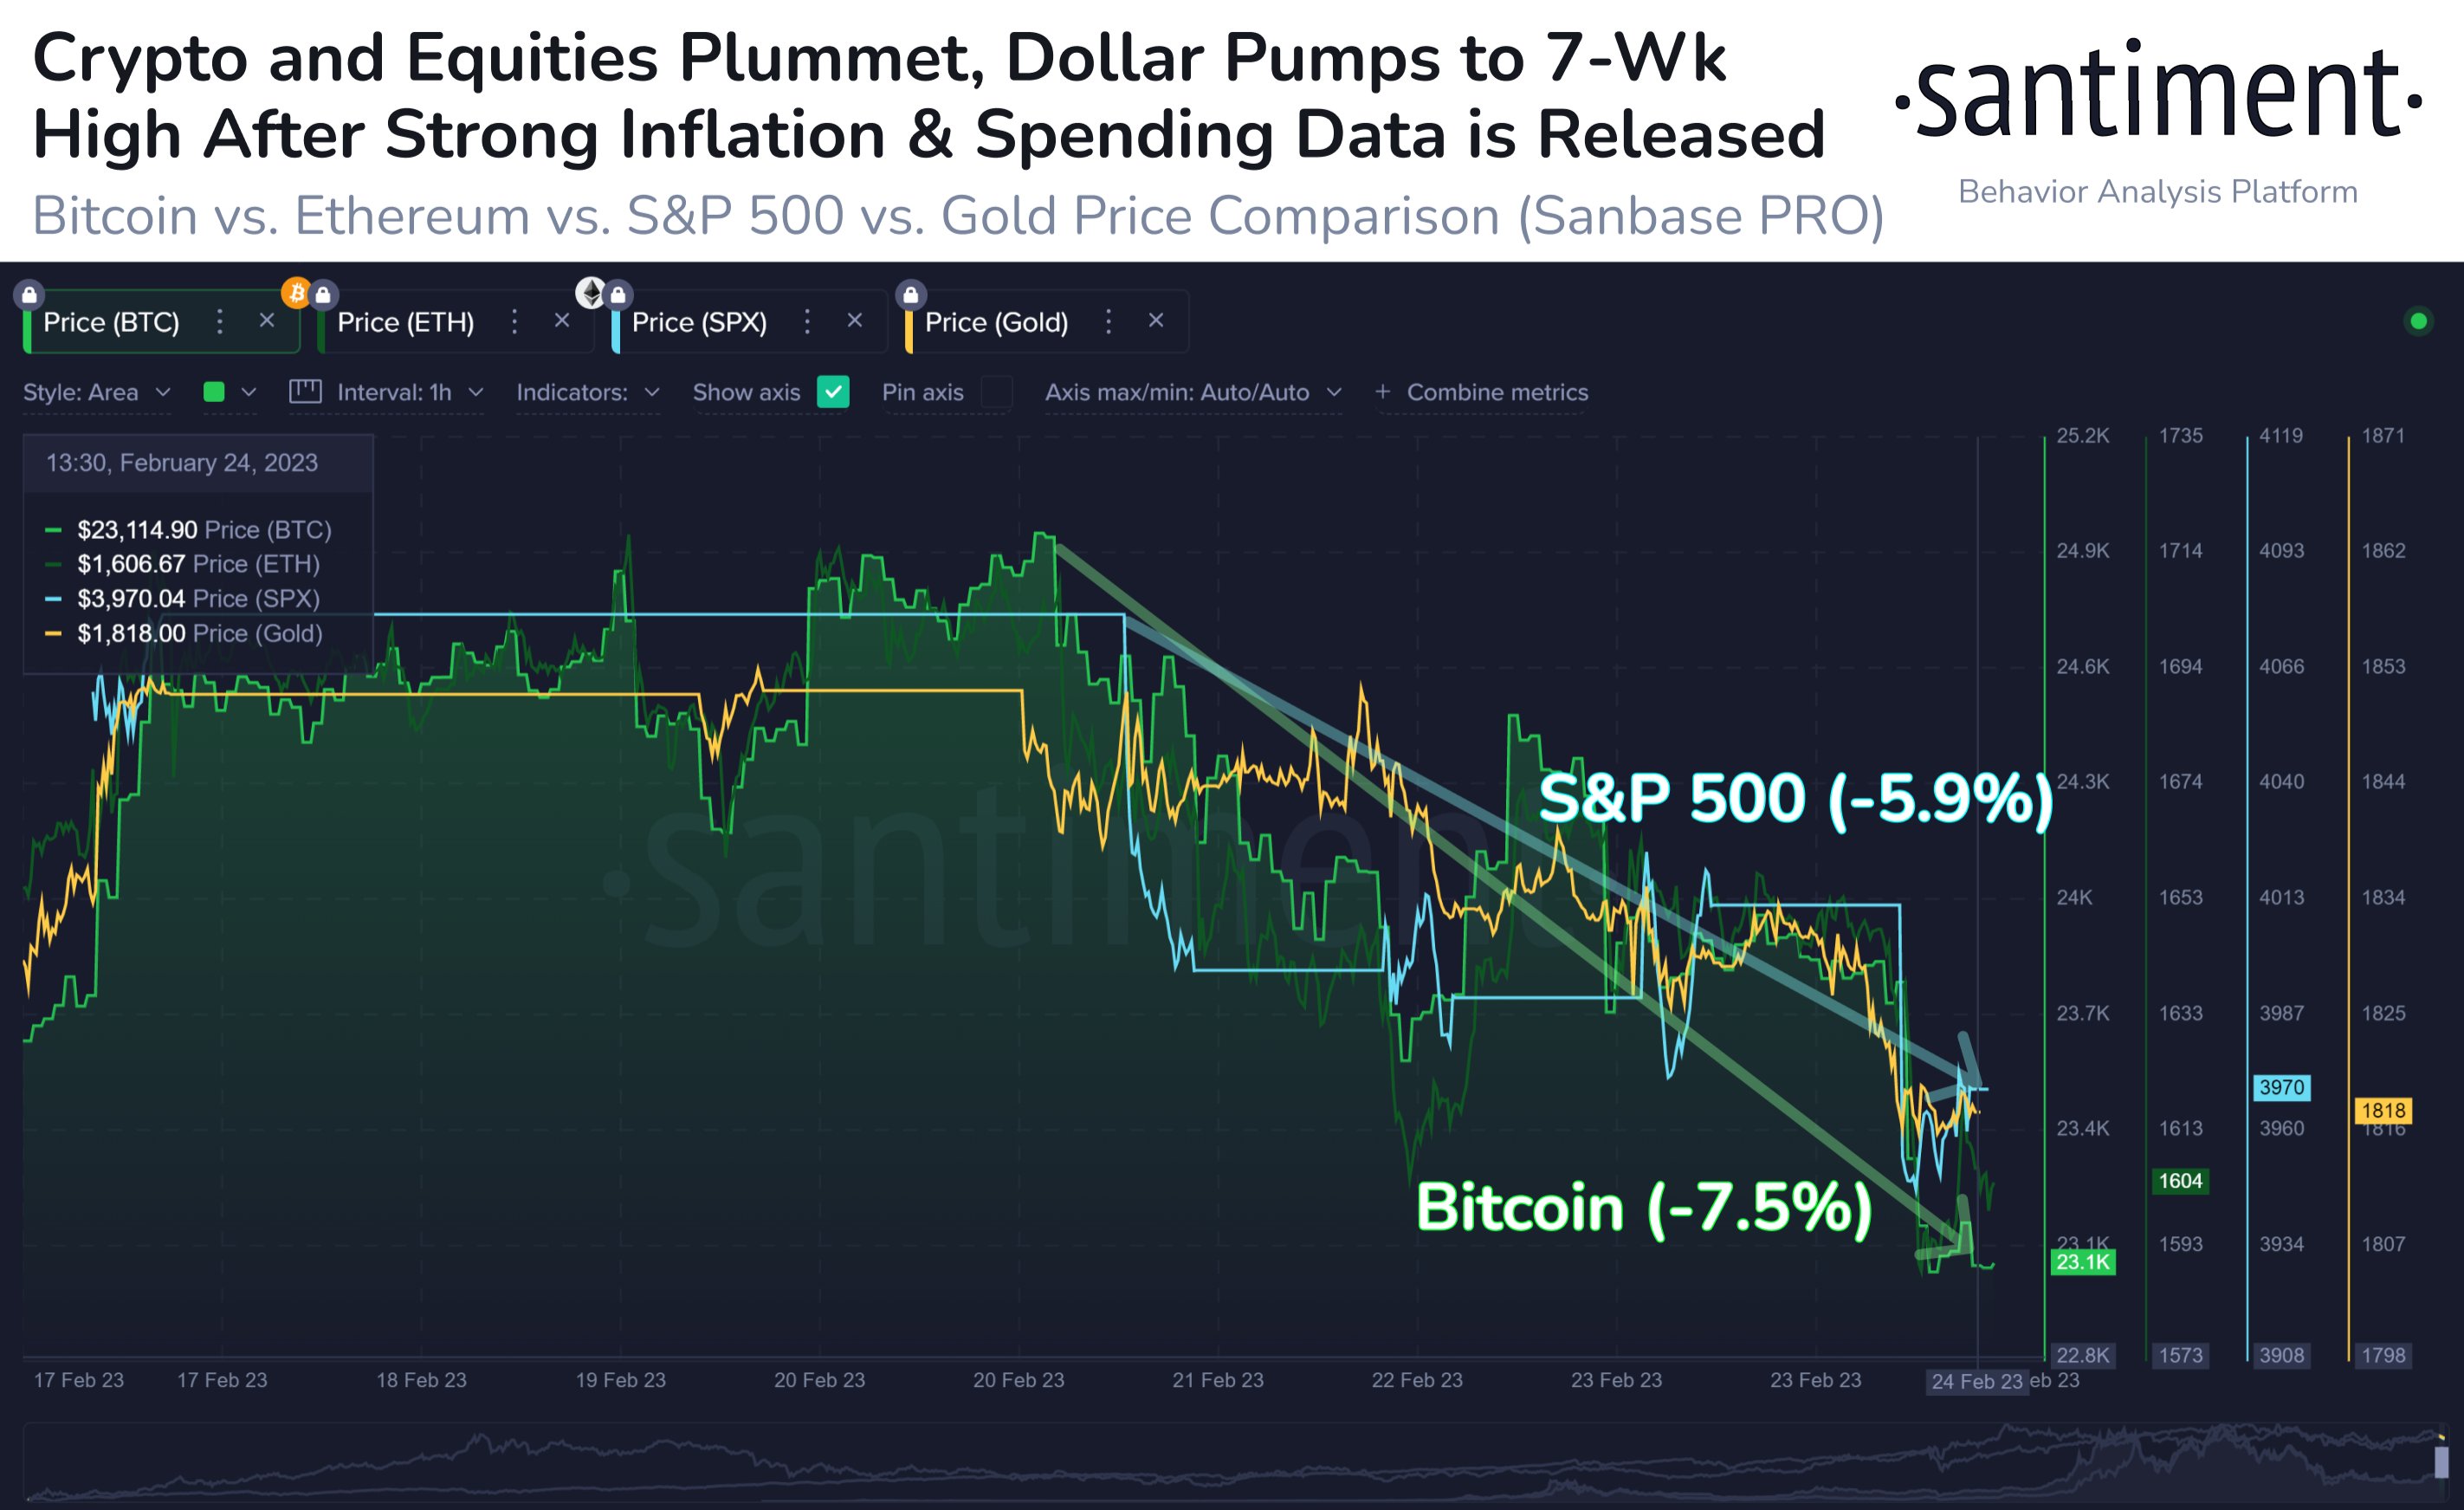 Bitcoin and equities declined as US Dollar pumped to seven-week high